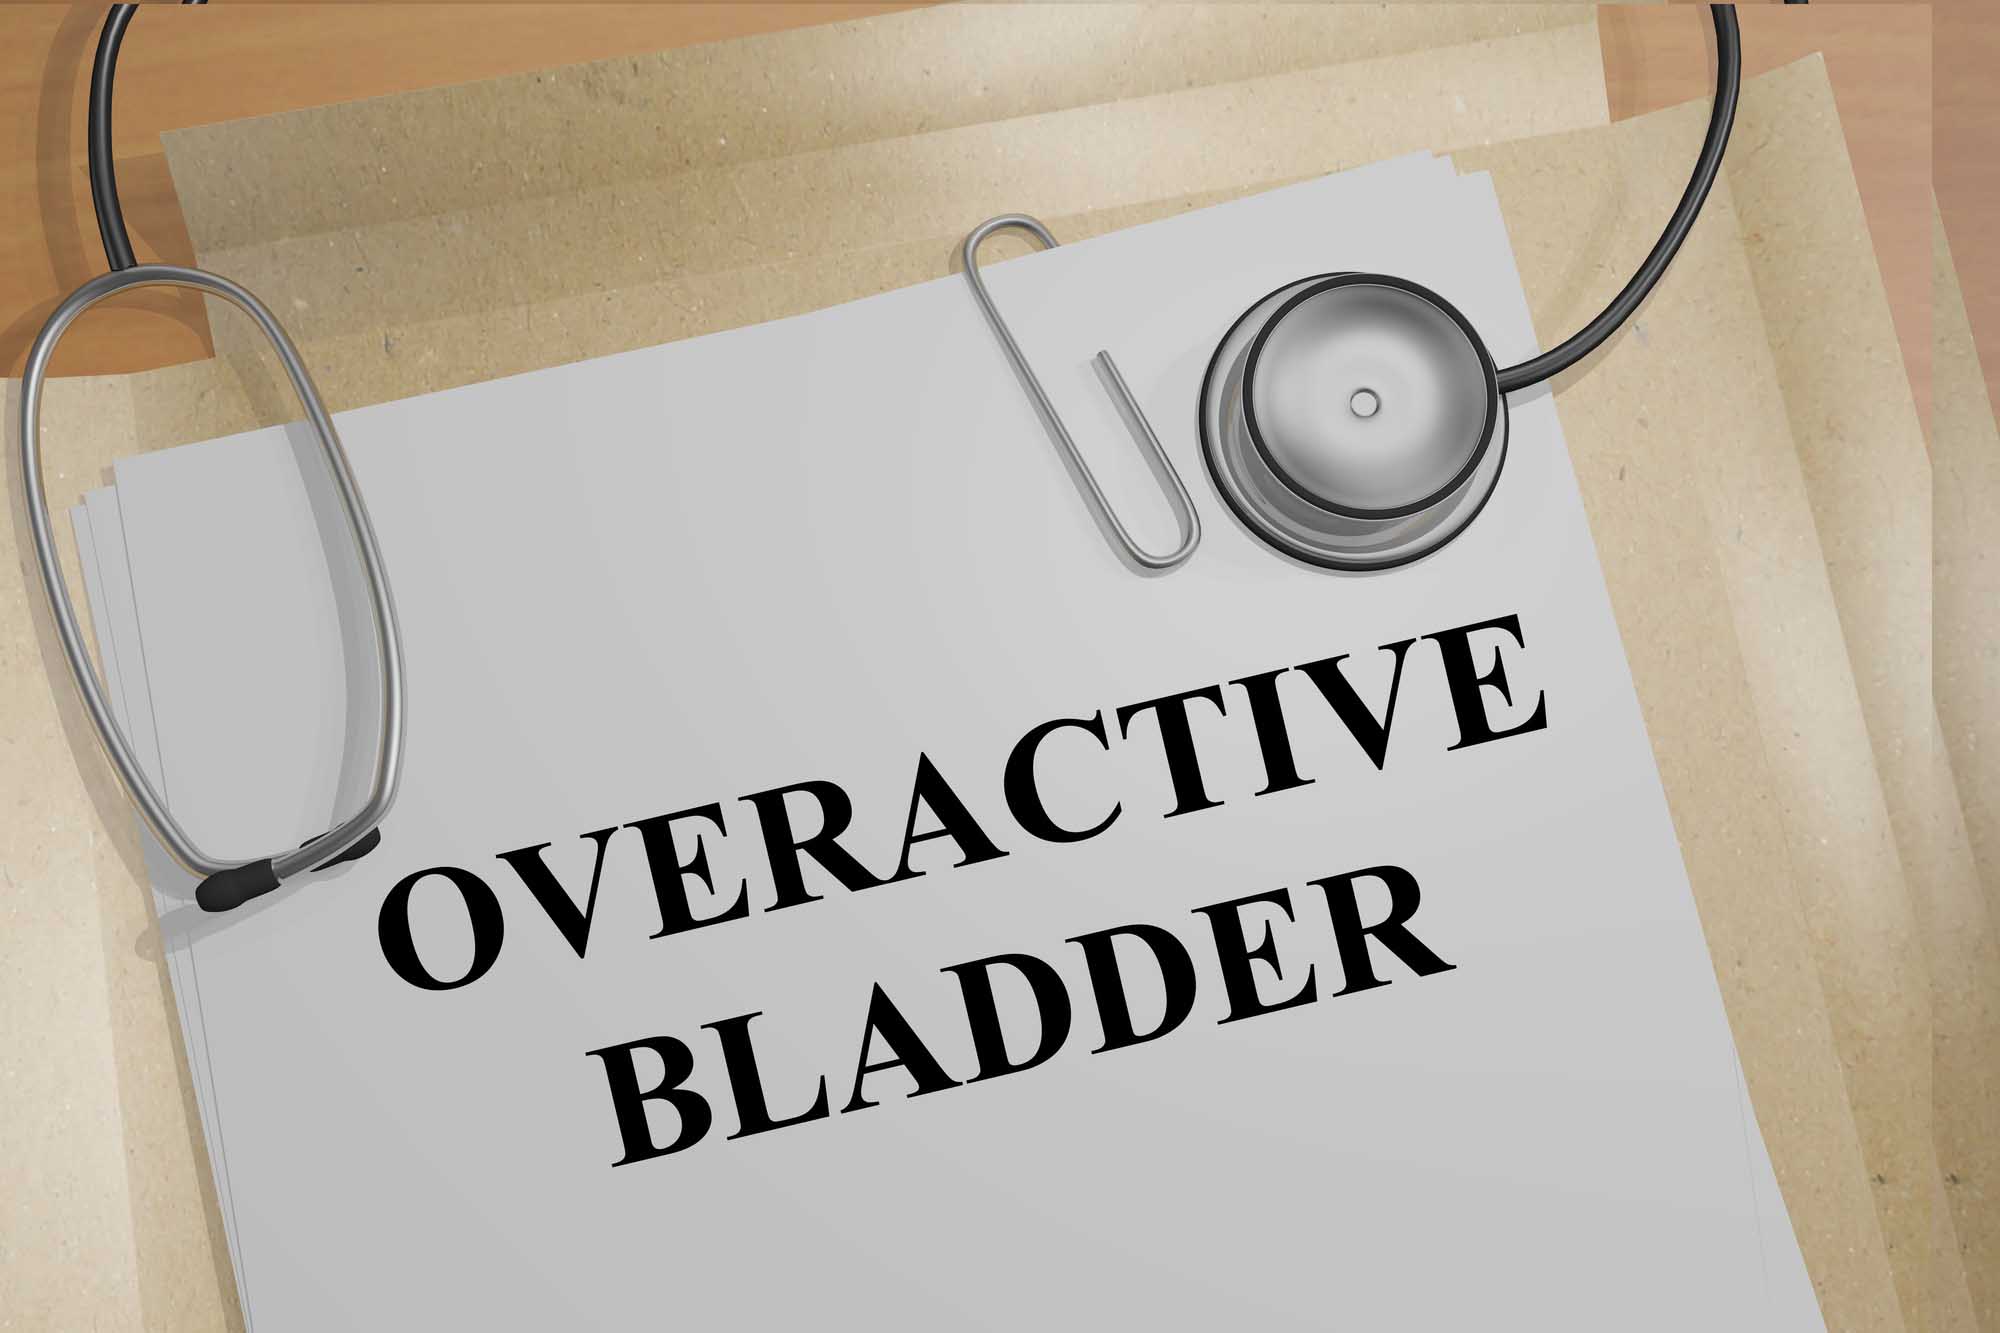 What Is Overactive Bladder